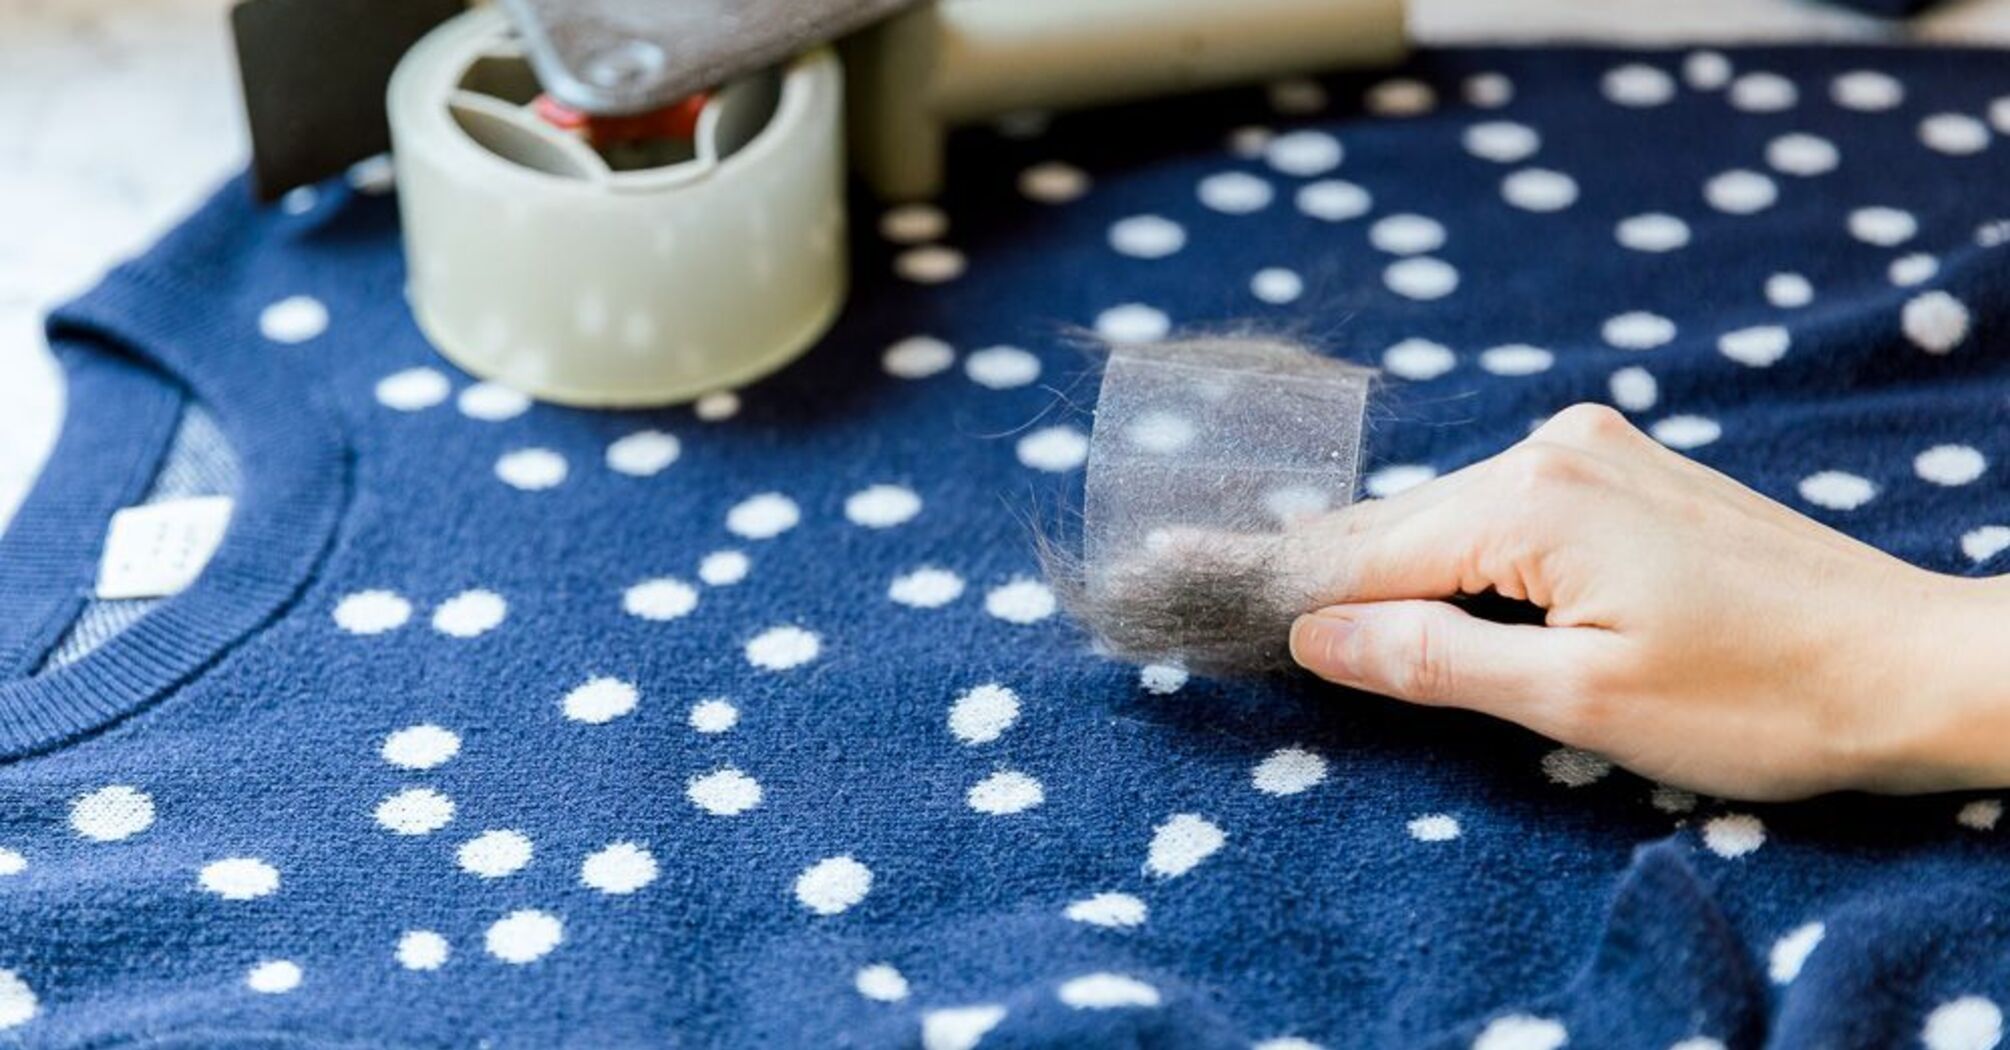 How to easily remove pet hair from clothes